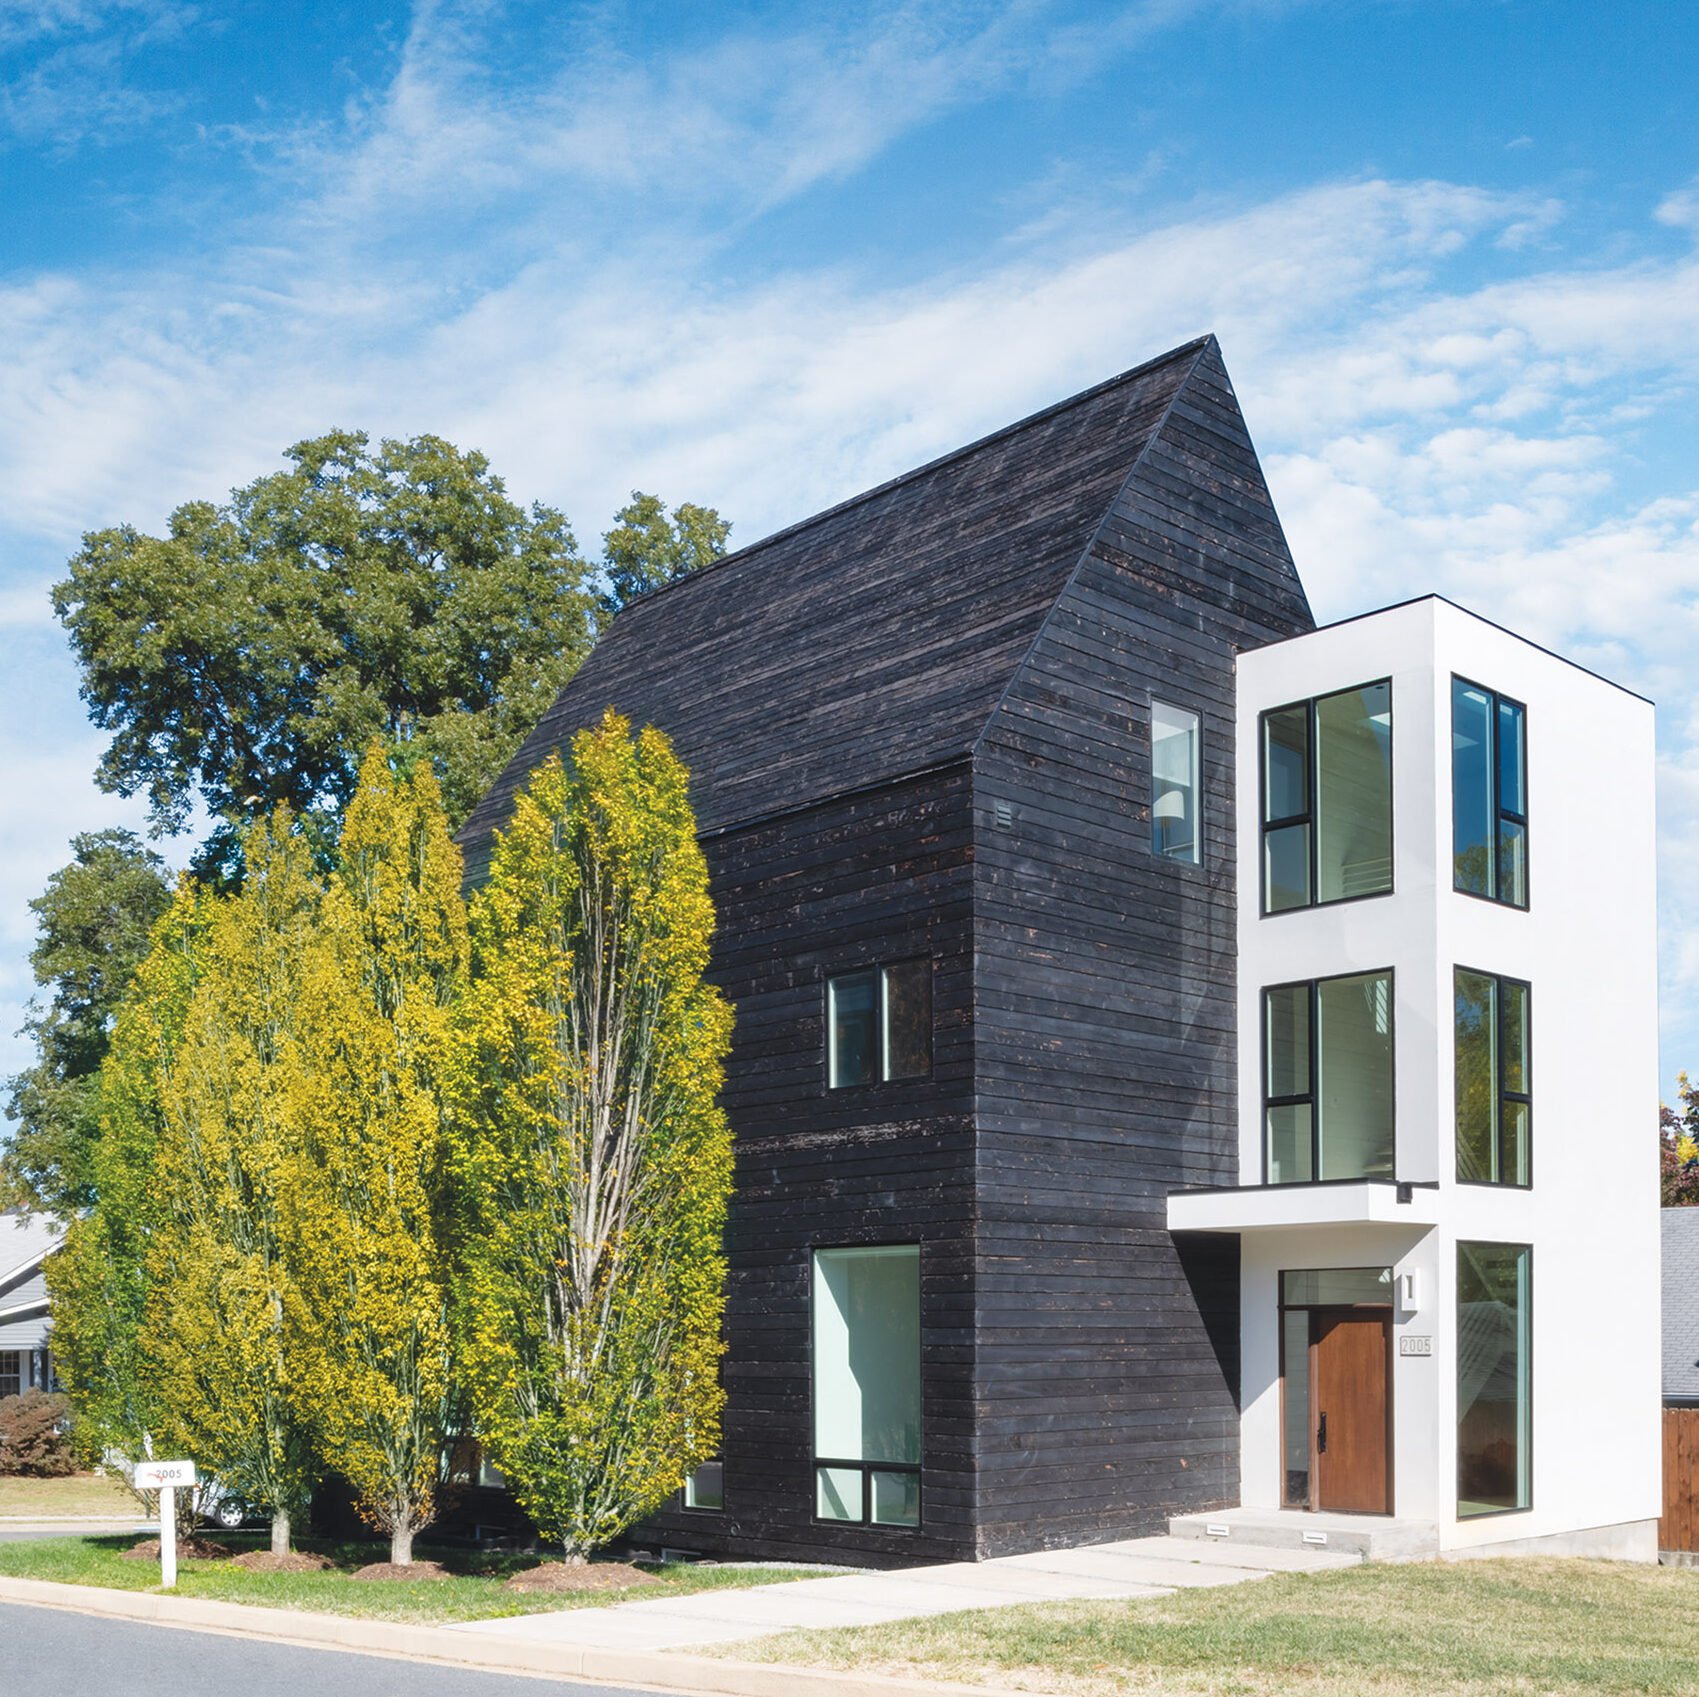 Block-like volume covered in HardiePanel siding houses the stairs.